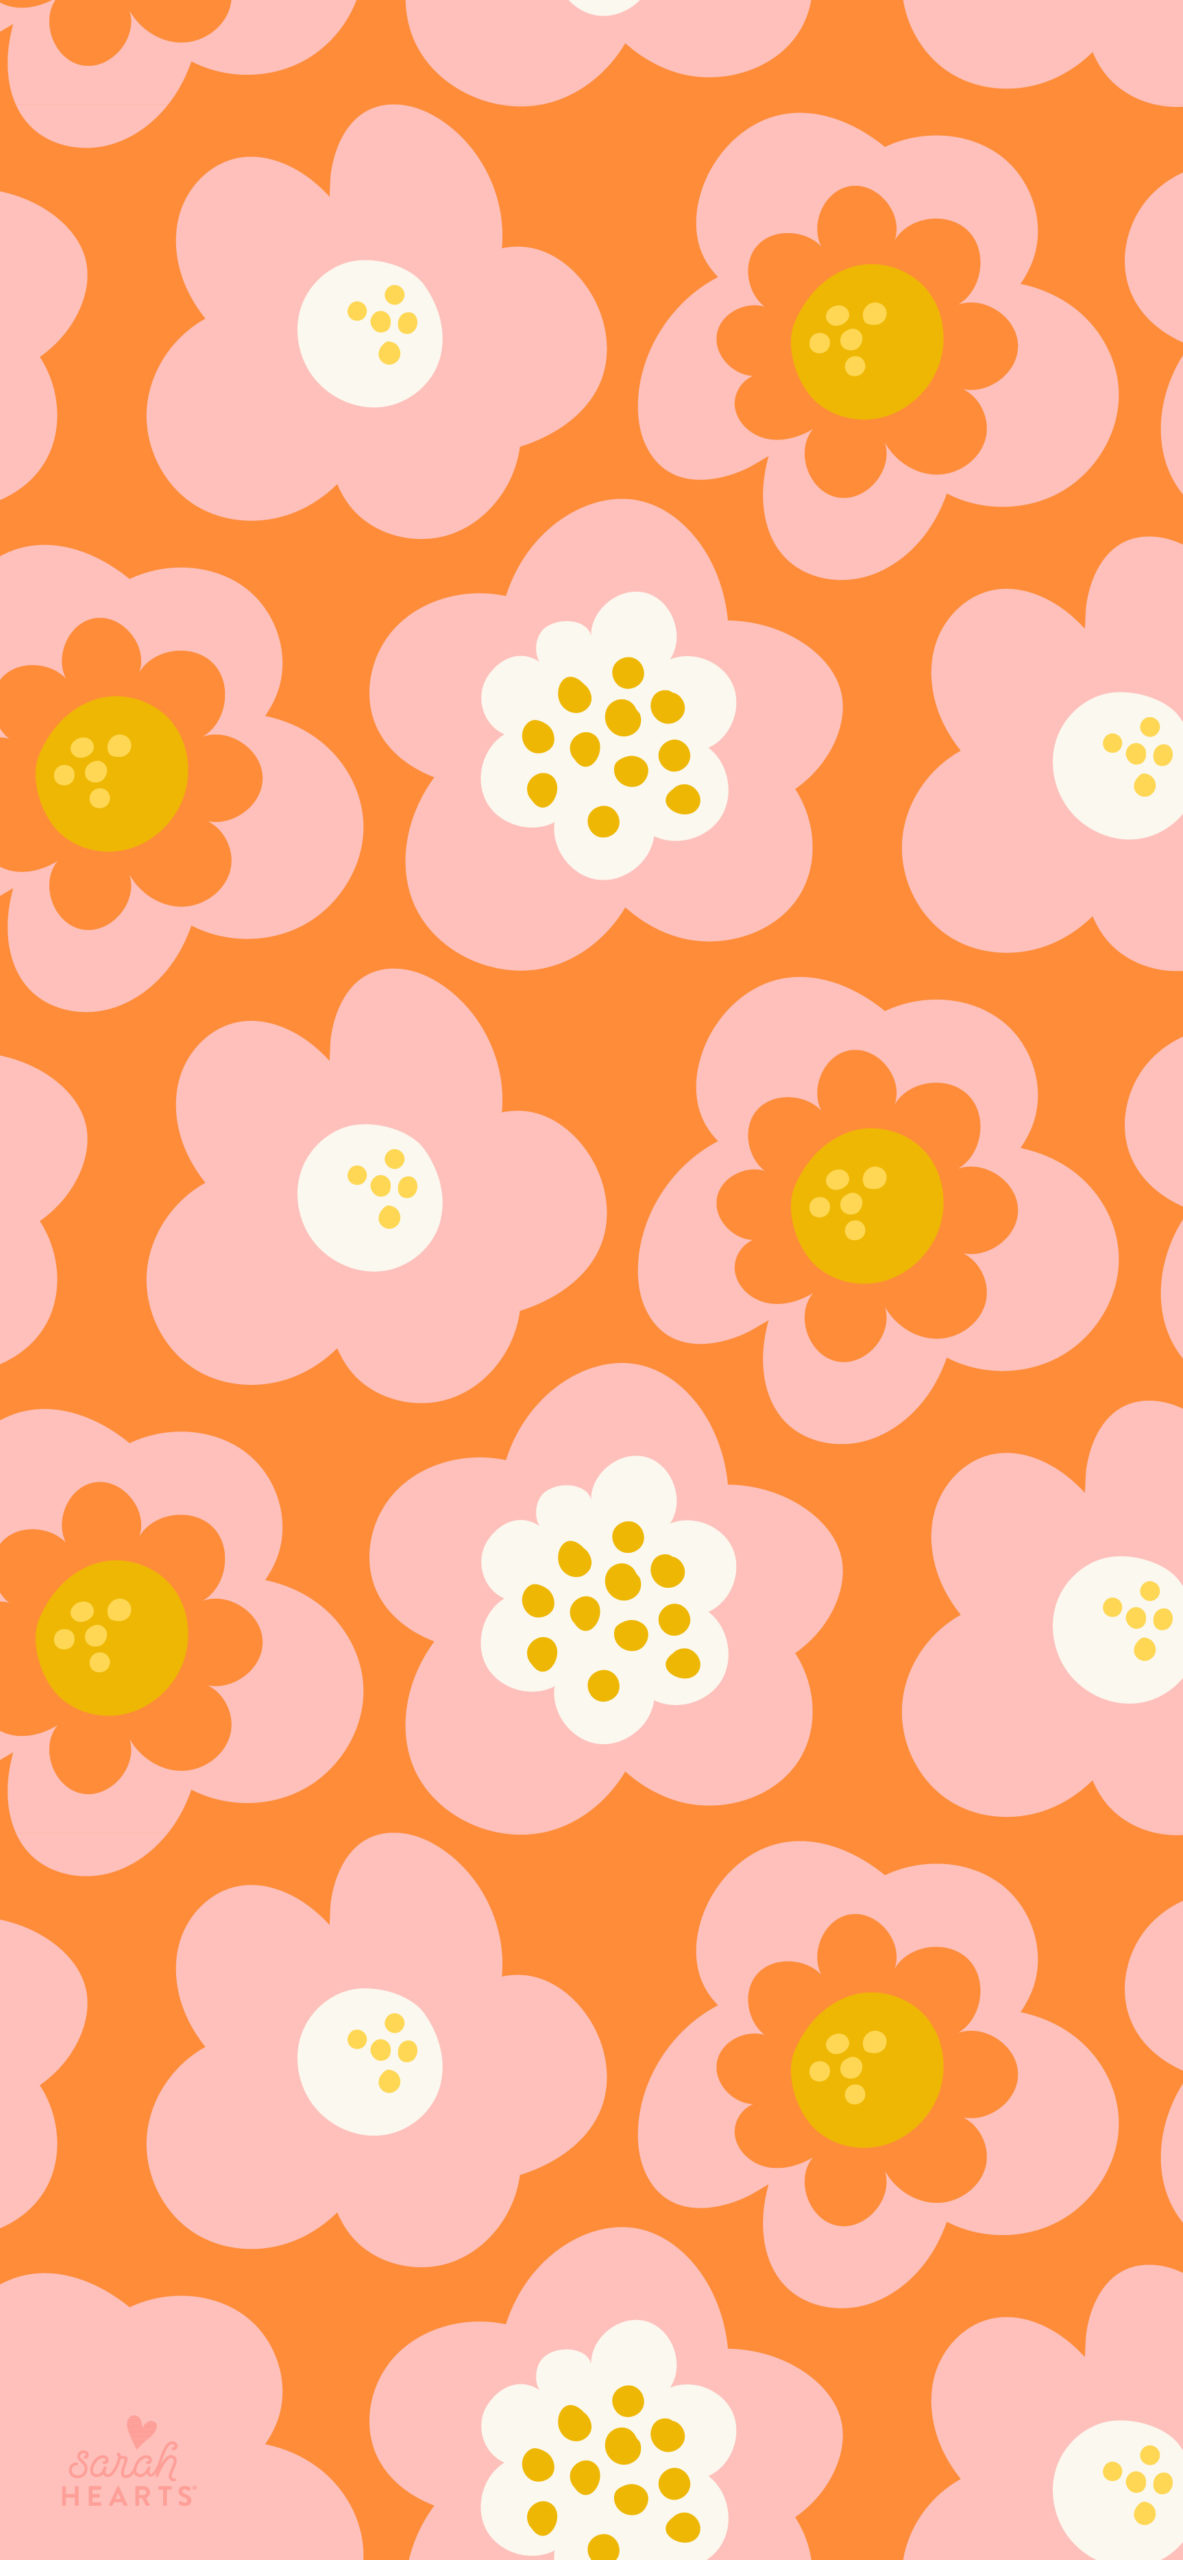 Orange and Pink Wallpapers  Top Free Orange and Pink Backgrounds   WallpaperAccess